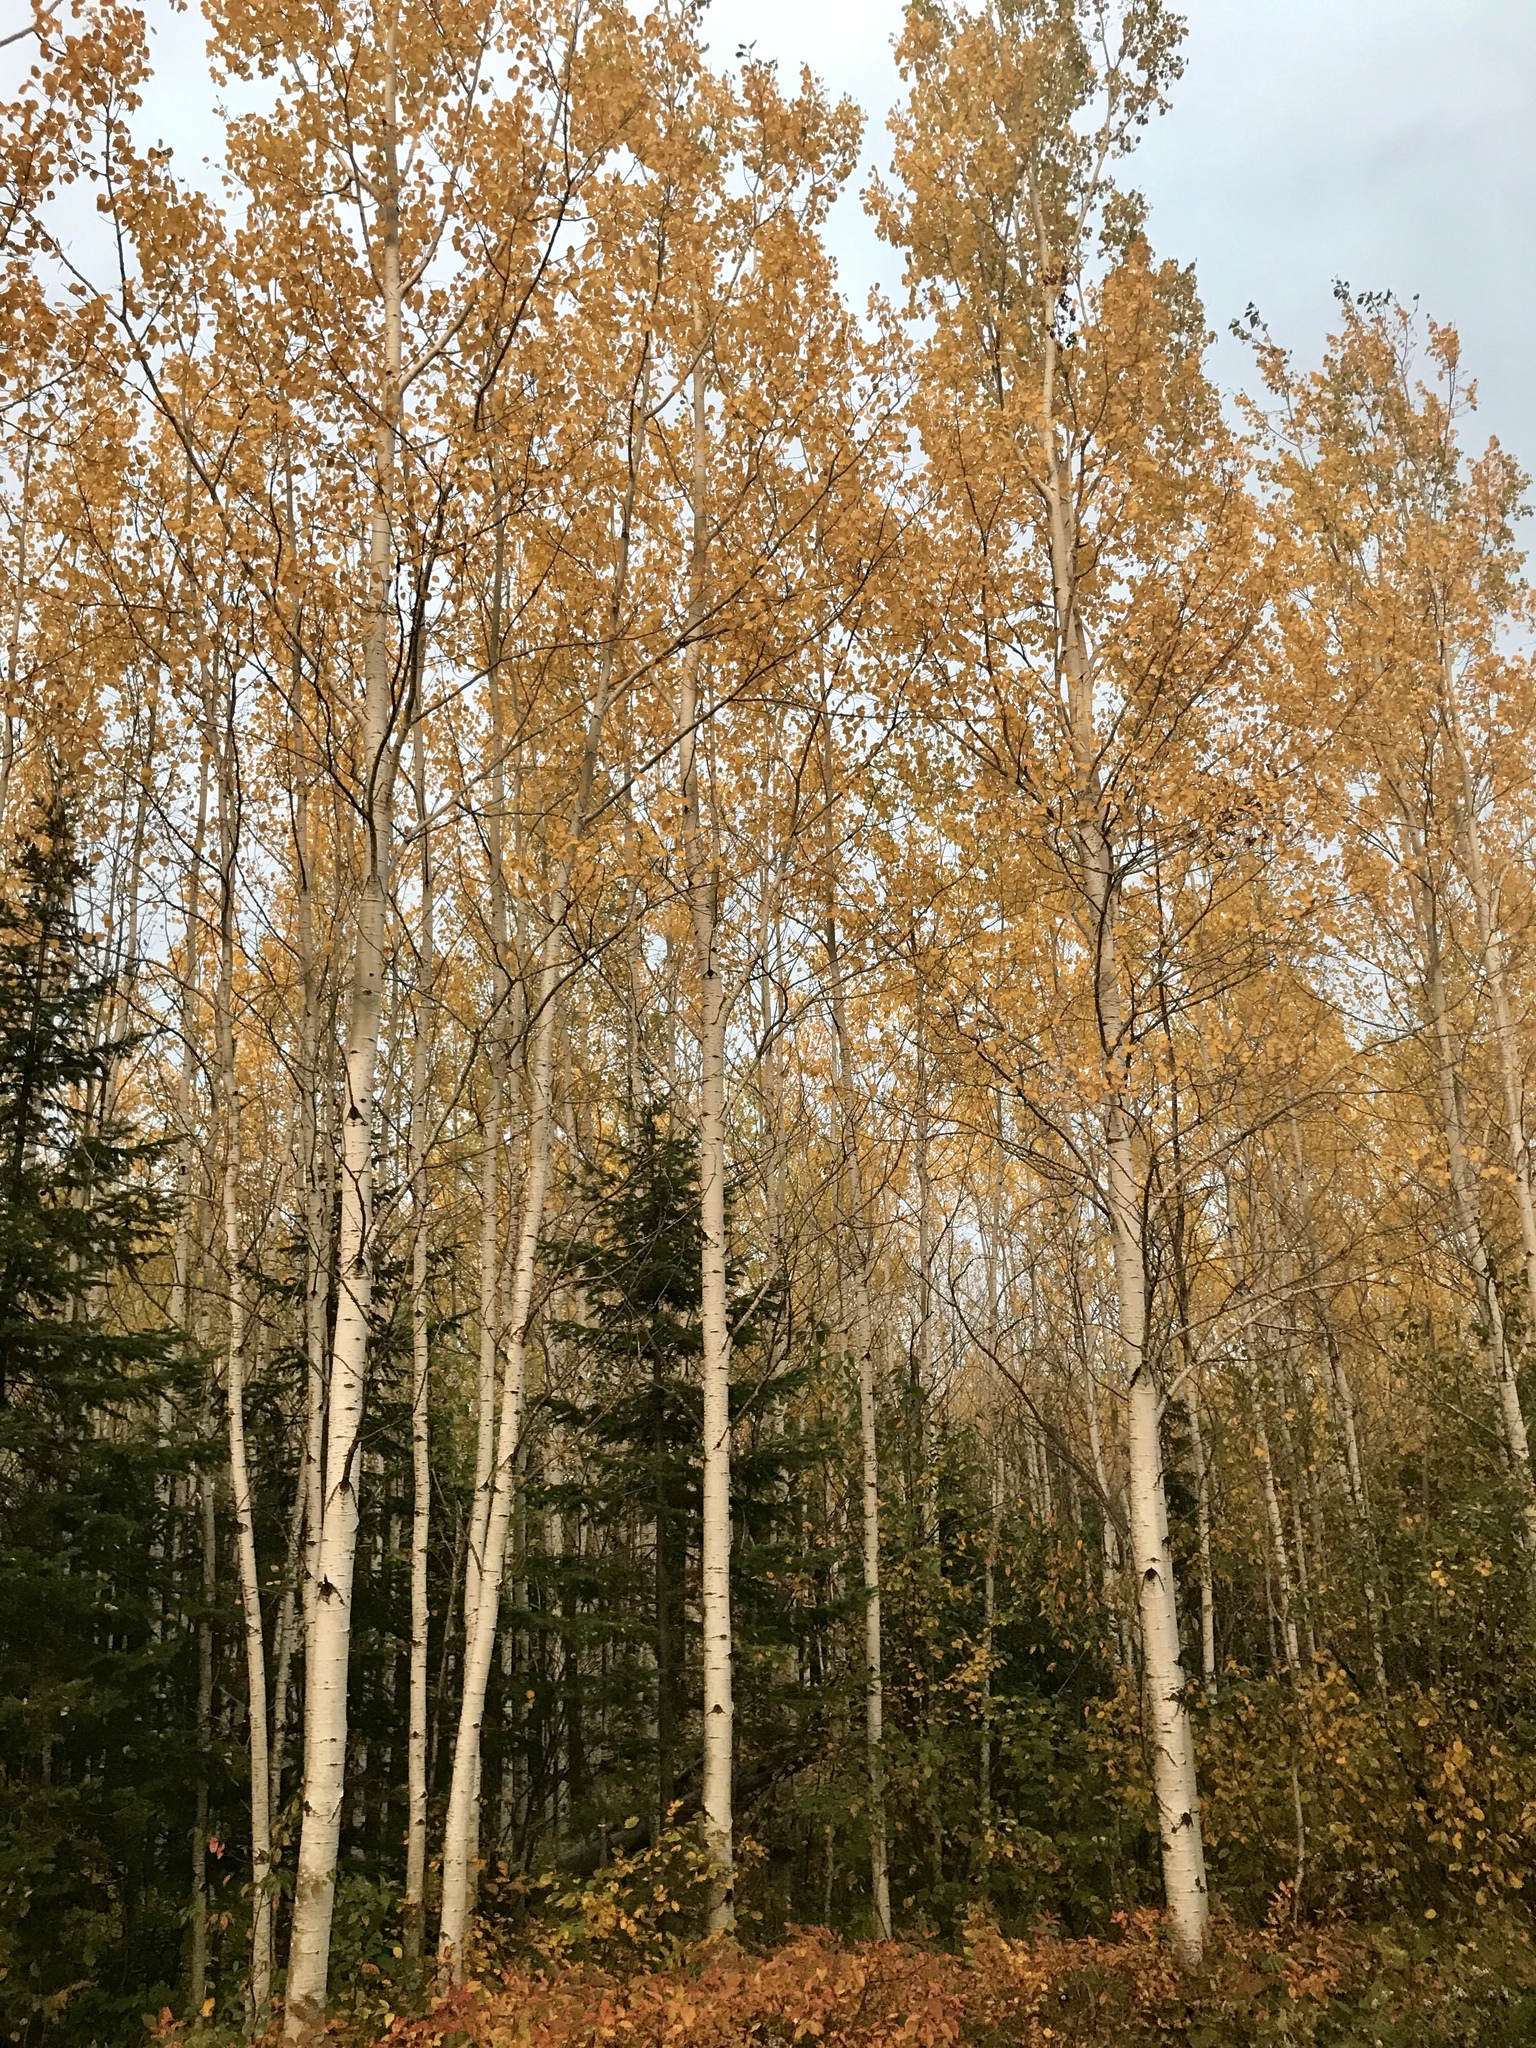 Image looking at the forest edge. Dense aspen trees have straight, pale gray trunks and golden leaves. Also in the forest are some spruce, which are only half as tall as the aspens.